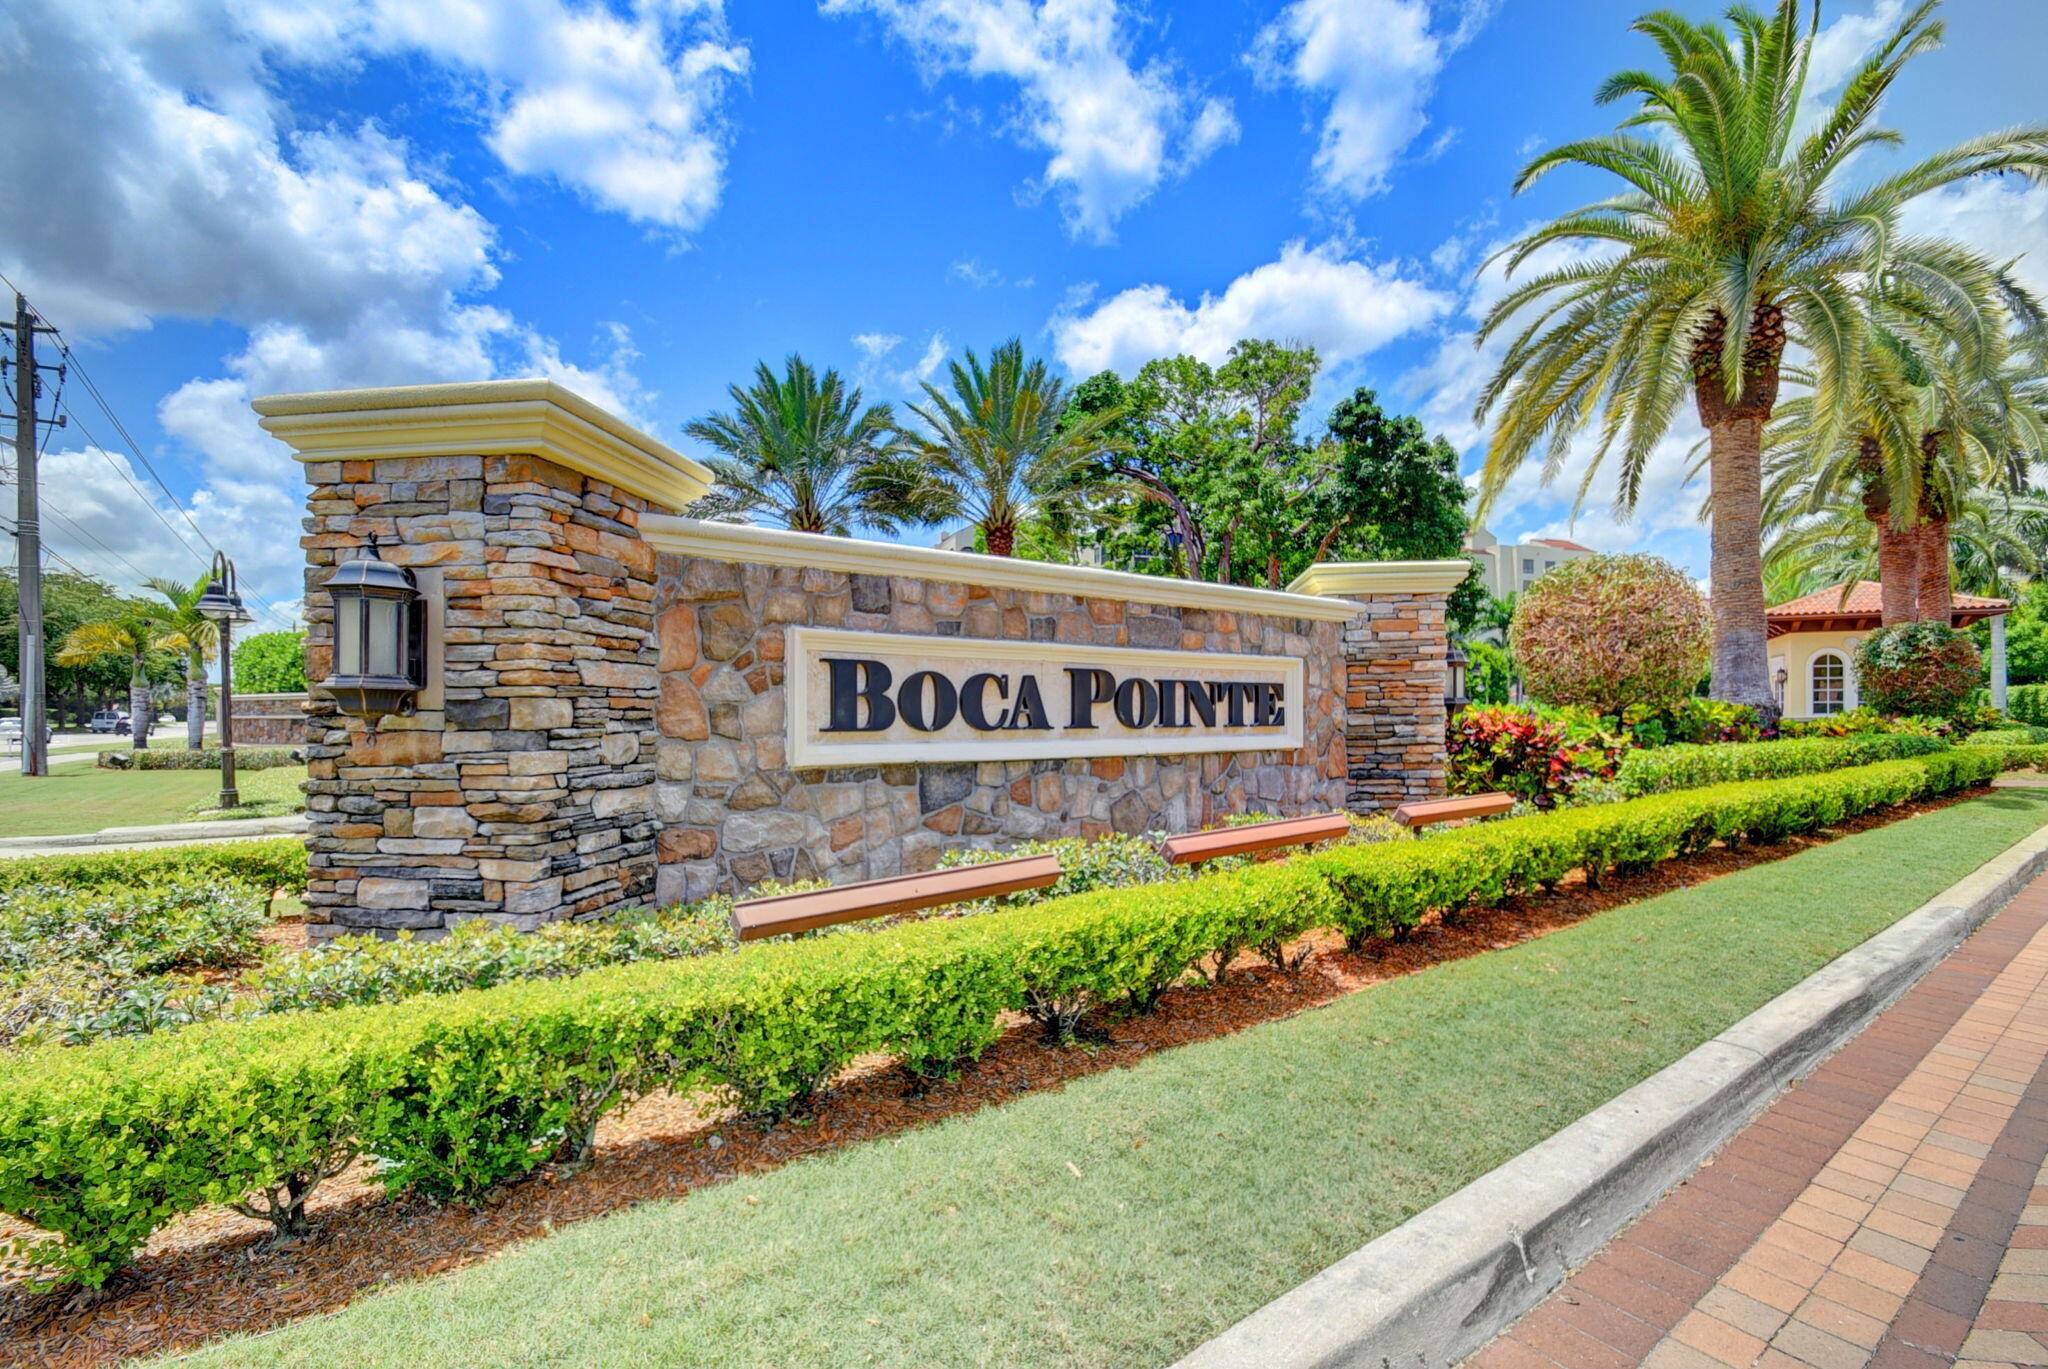 Boca Pointe Condo 2 Bedroom 2 Bath Overlooking the Golf Couse, Ponds and Paths.